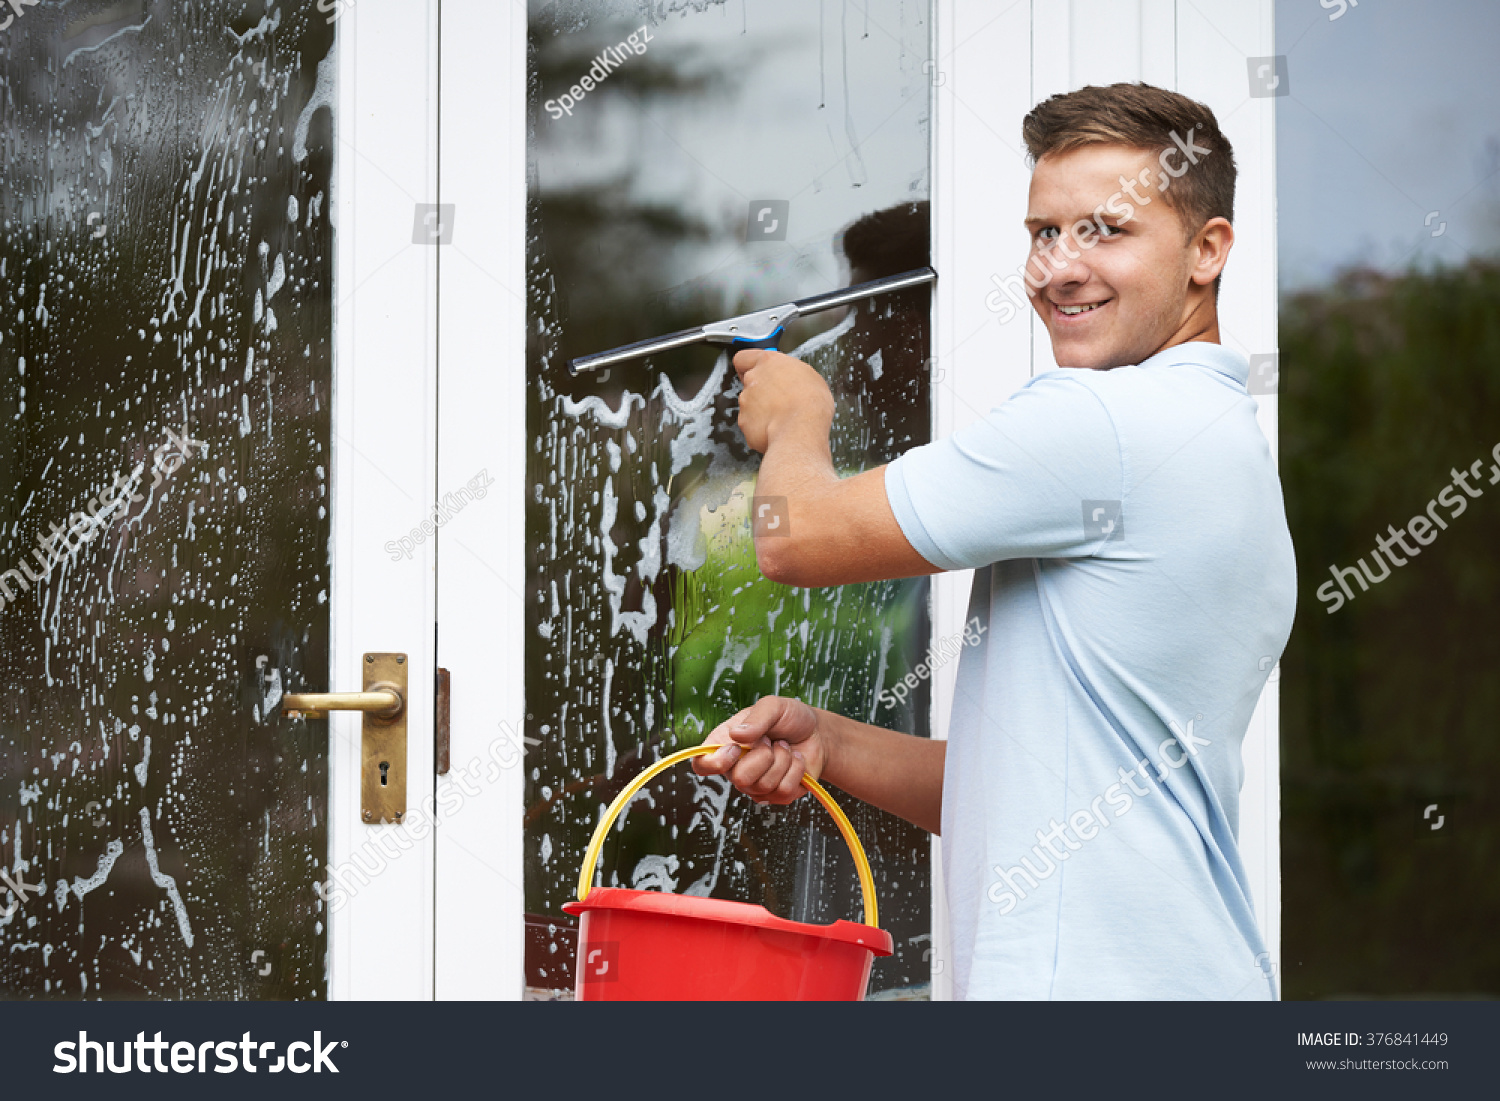 Portrait Of Man Cleaning House Windows Stock Photo 376841449 : Shutterstock